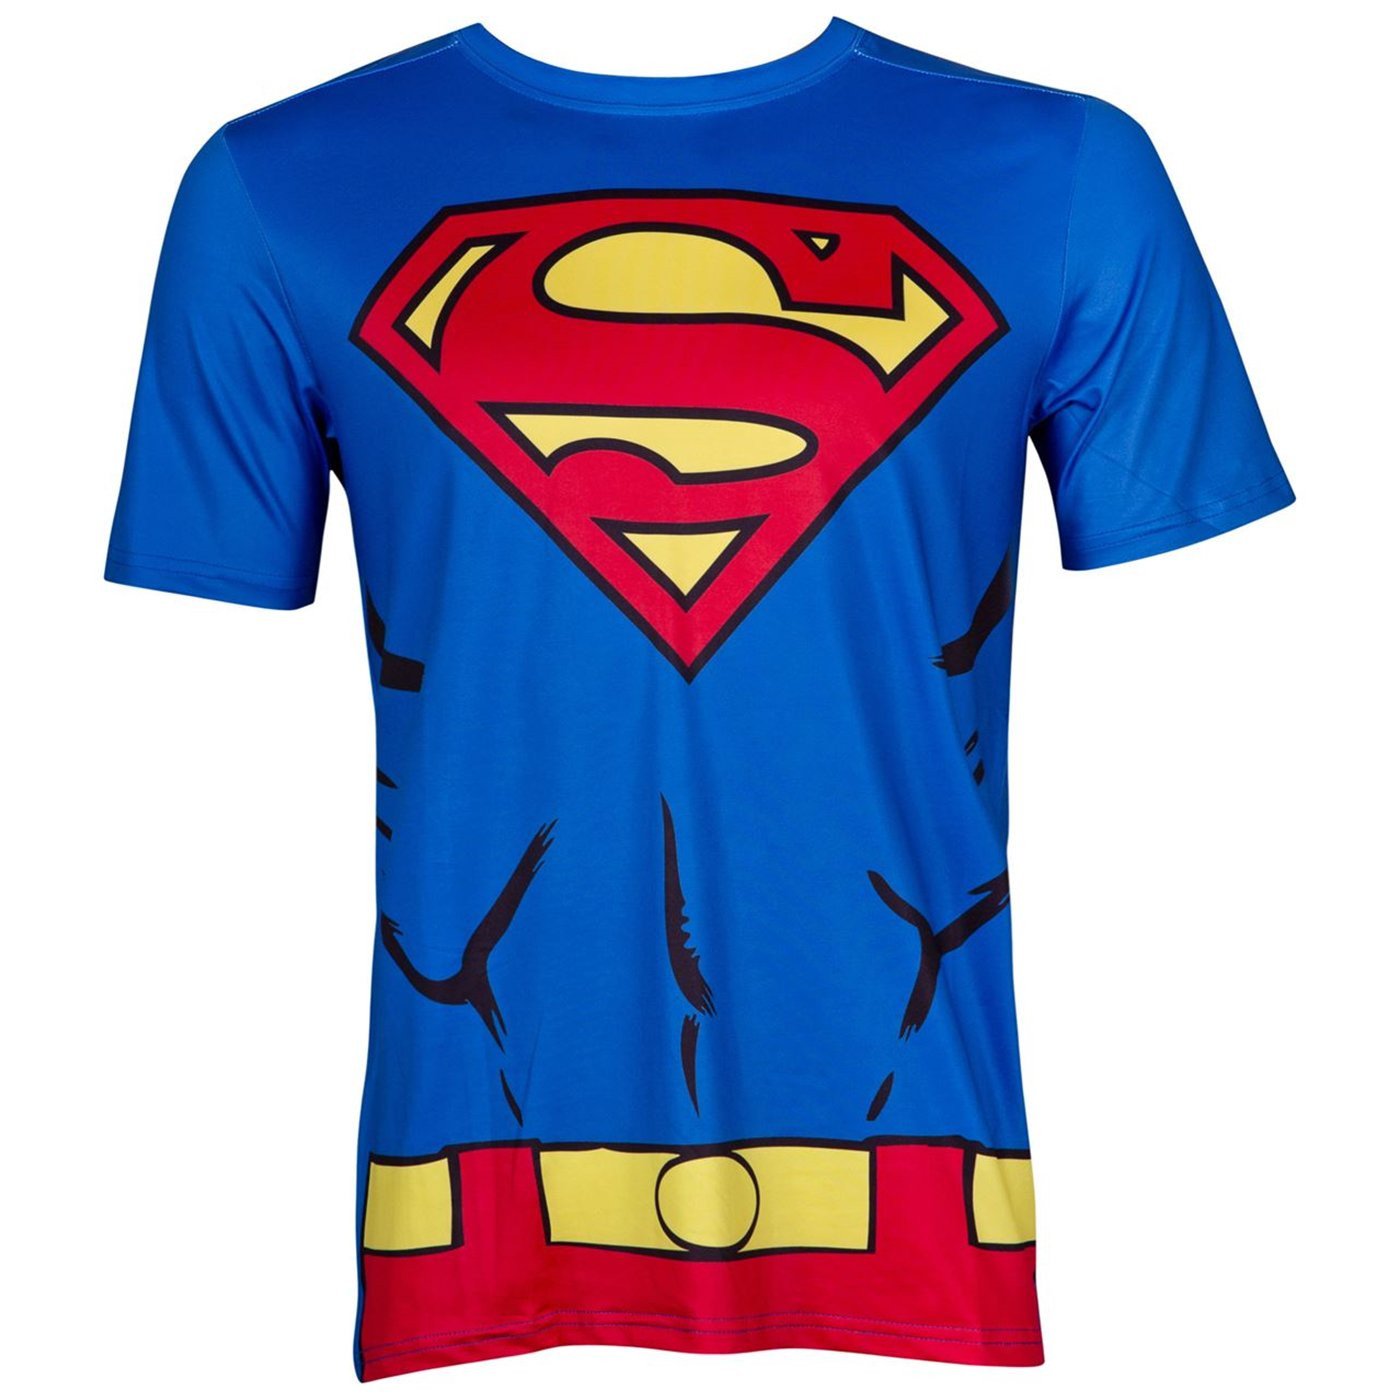 Superman Performance Athletic Costume Adult T-Shirt with Muscles and Belt Design